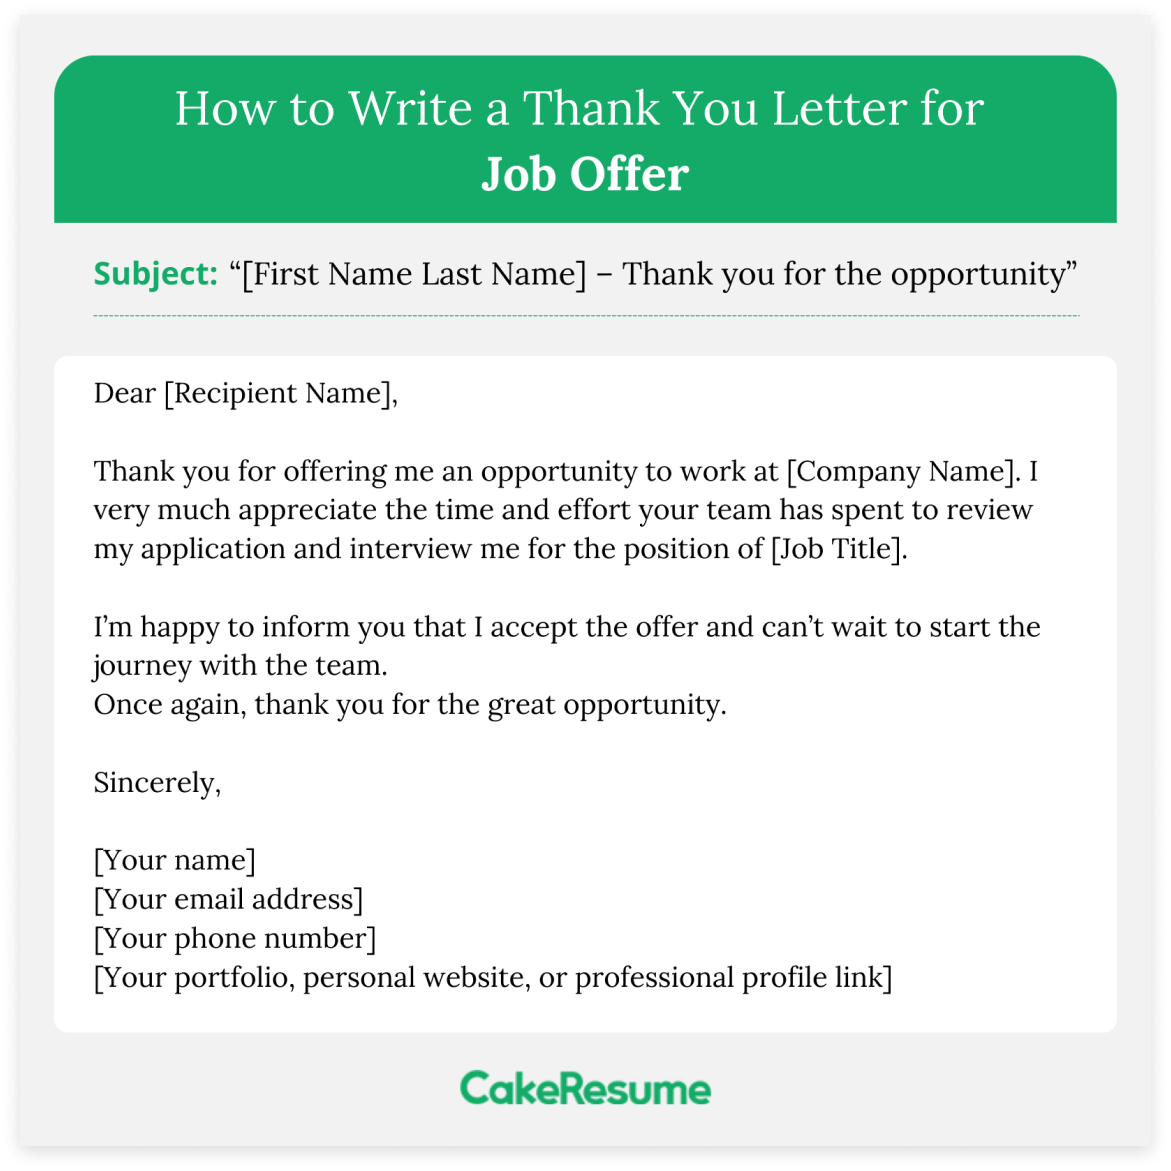 how-to-write-a-thank-you-letter